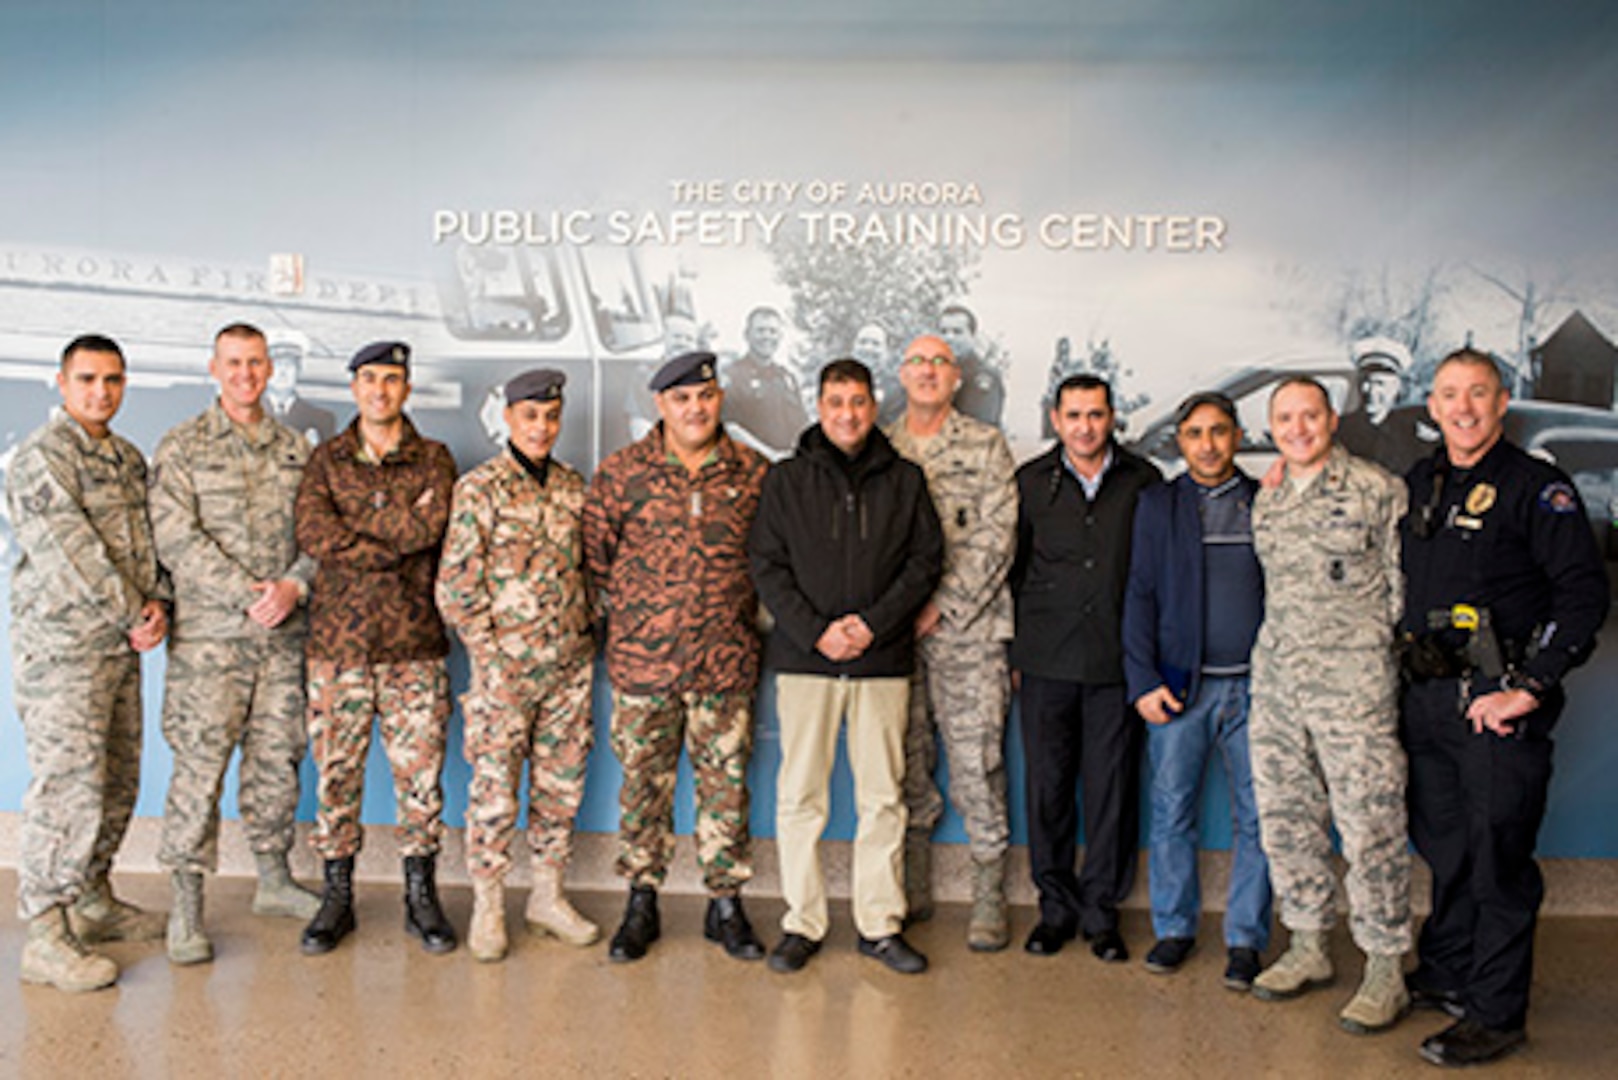 ​Members of the Royal Jordanian Air Force Ground Defense, Jordanian
Military Security, Aurora Police Department, the Colorado Air National
Guard's 233d and 140th Security Forces Squadrons collaborate on tactics and
procedures for base defense in Colorado, Jan. 11-12, 2017.
This is the first base defense delegation to participate in the 13-year
State Partnership, designed to bring Jordanian military and the
Colorado National Guard together to cooperate and share best practices on
mutual military concerns.  Members exchanged information on standards of
operation and tactical measures including, training procedures, random
anti-terrorism measures, and taser and fire arms simulator training during
this visit.